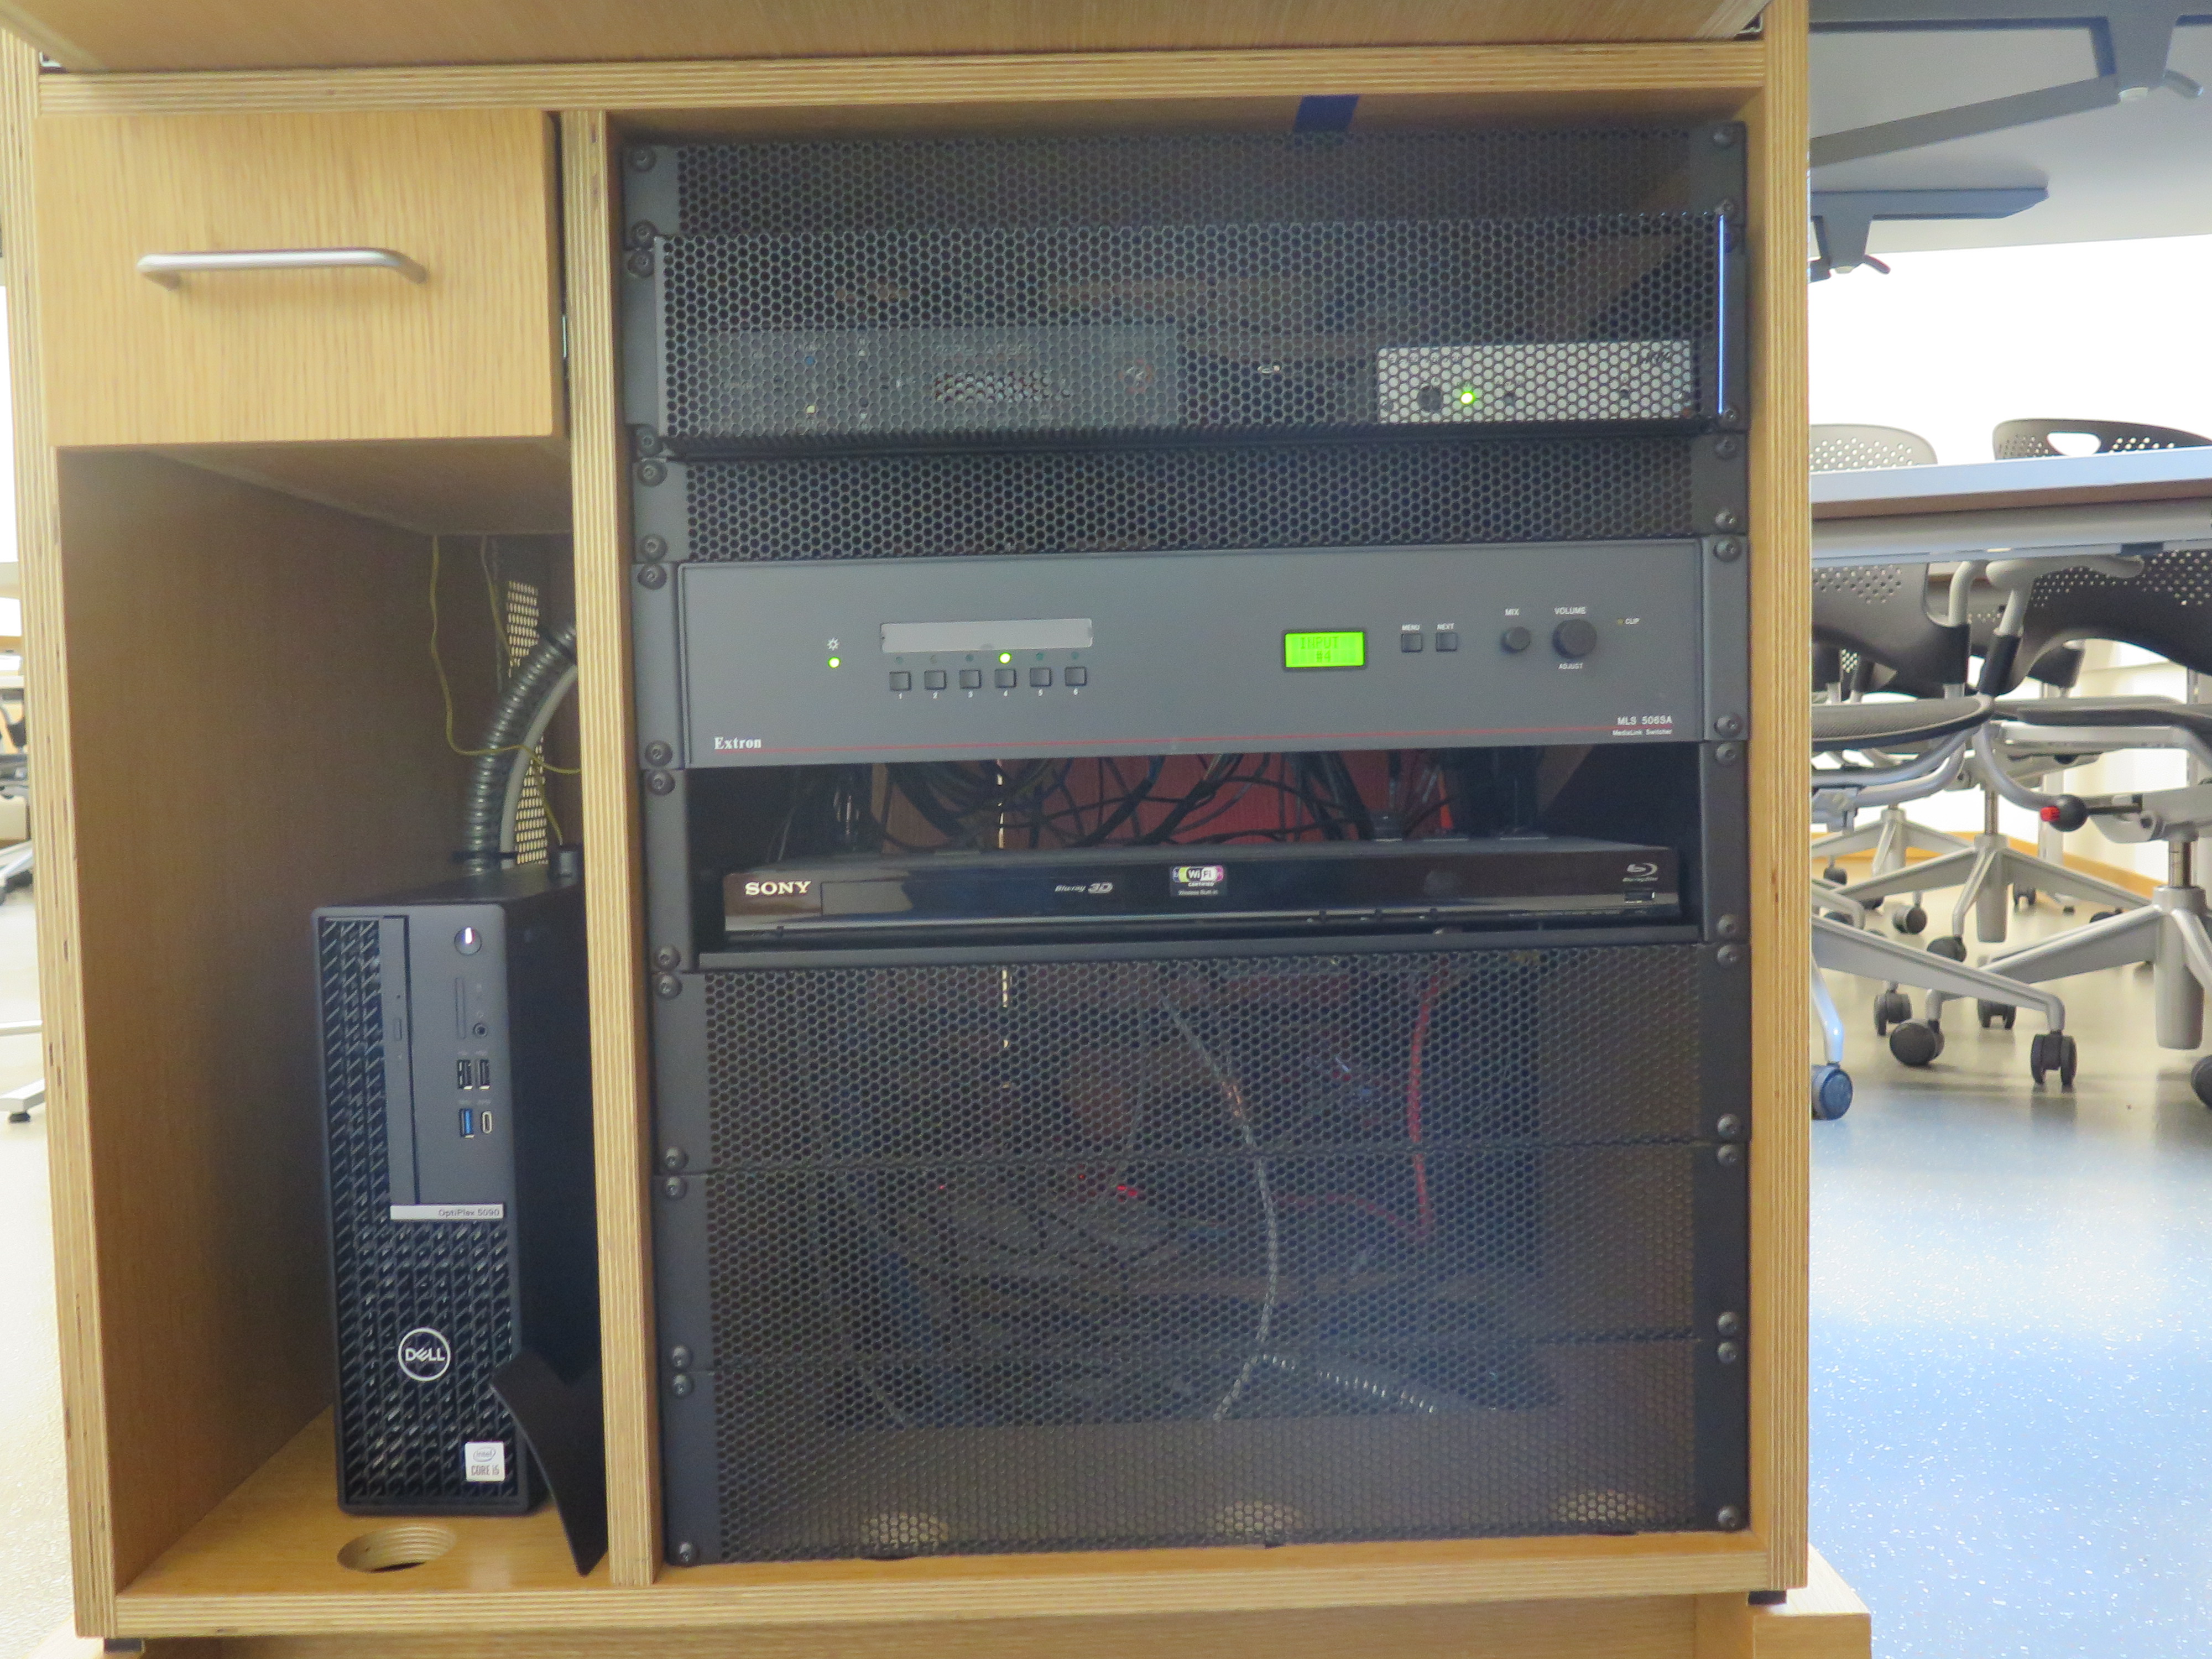 Front of Equipment rack showing AV Switcher. Below that is Blue-Ray/DVD Player. To the left is the compartment with the Dell Computer CPU.